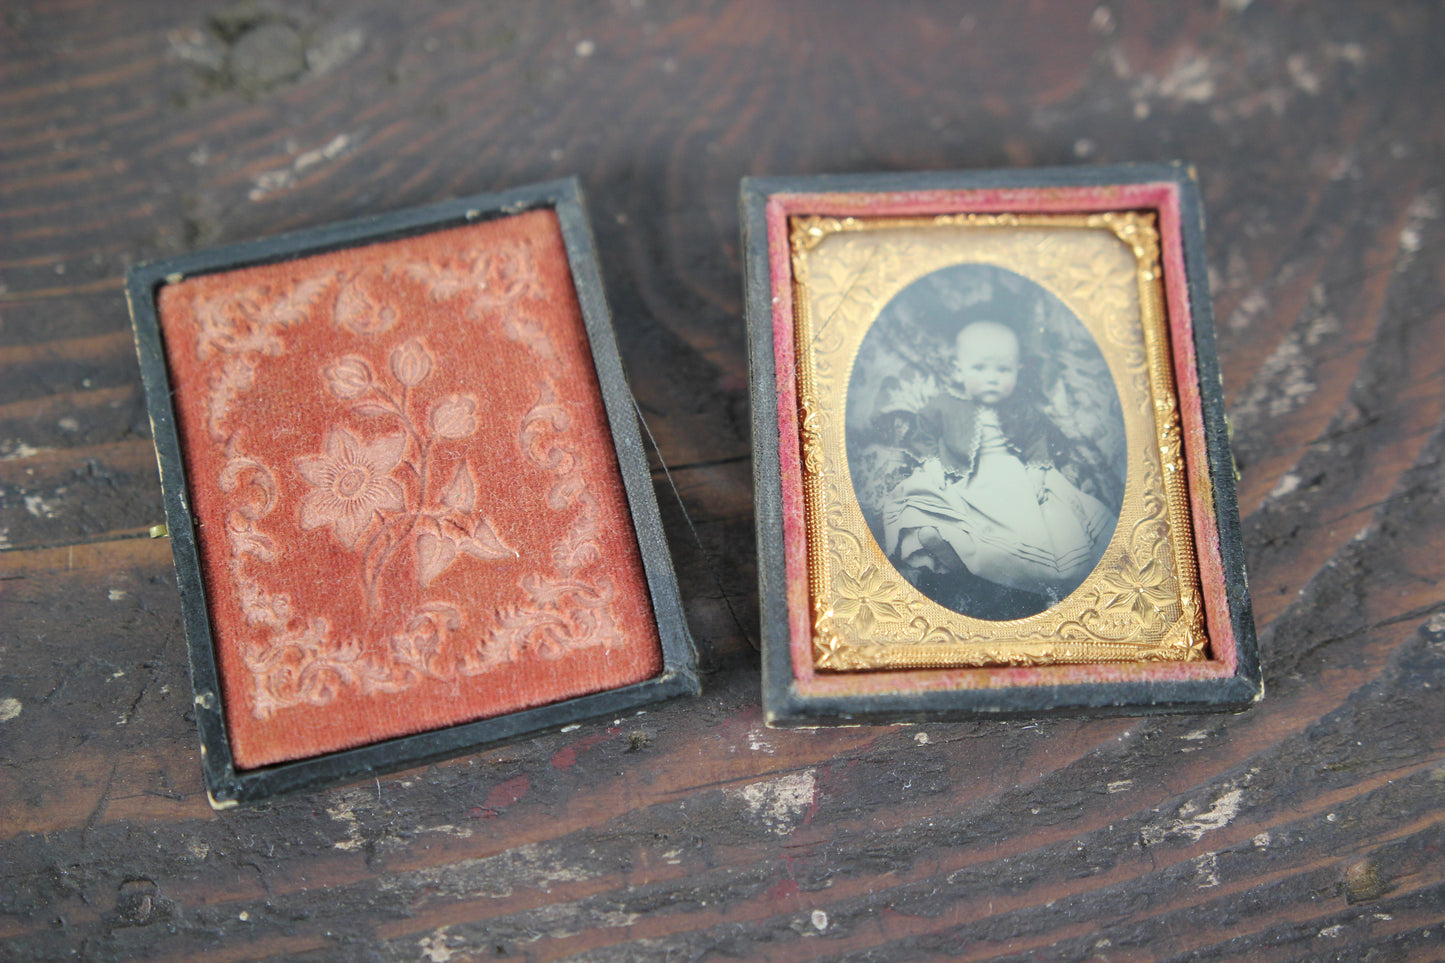 Hidden Mother Ambrotype Photograph of a Baby in a Case